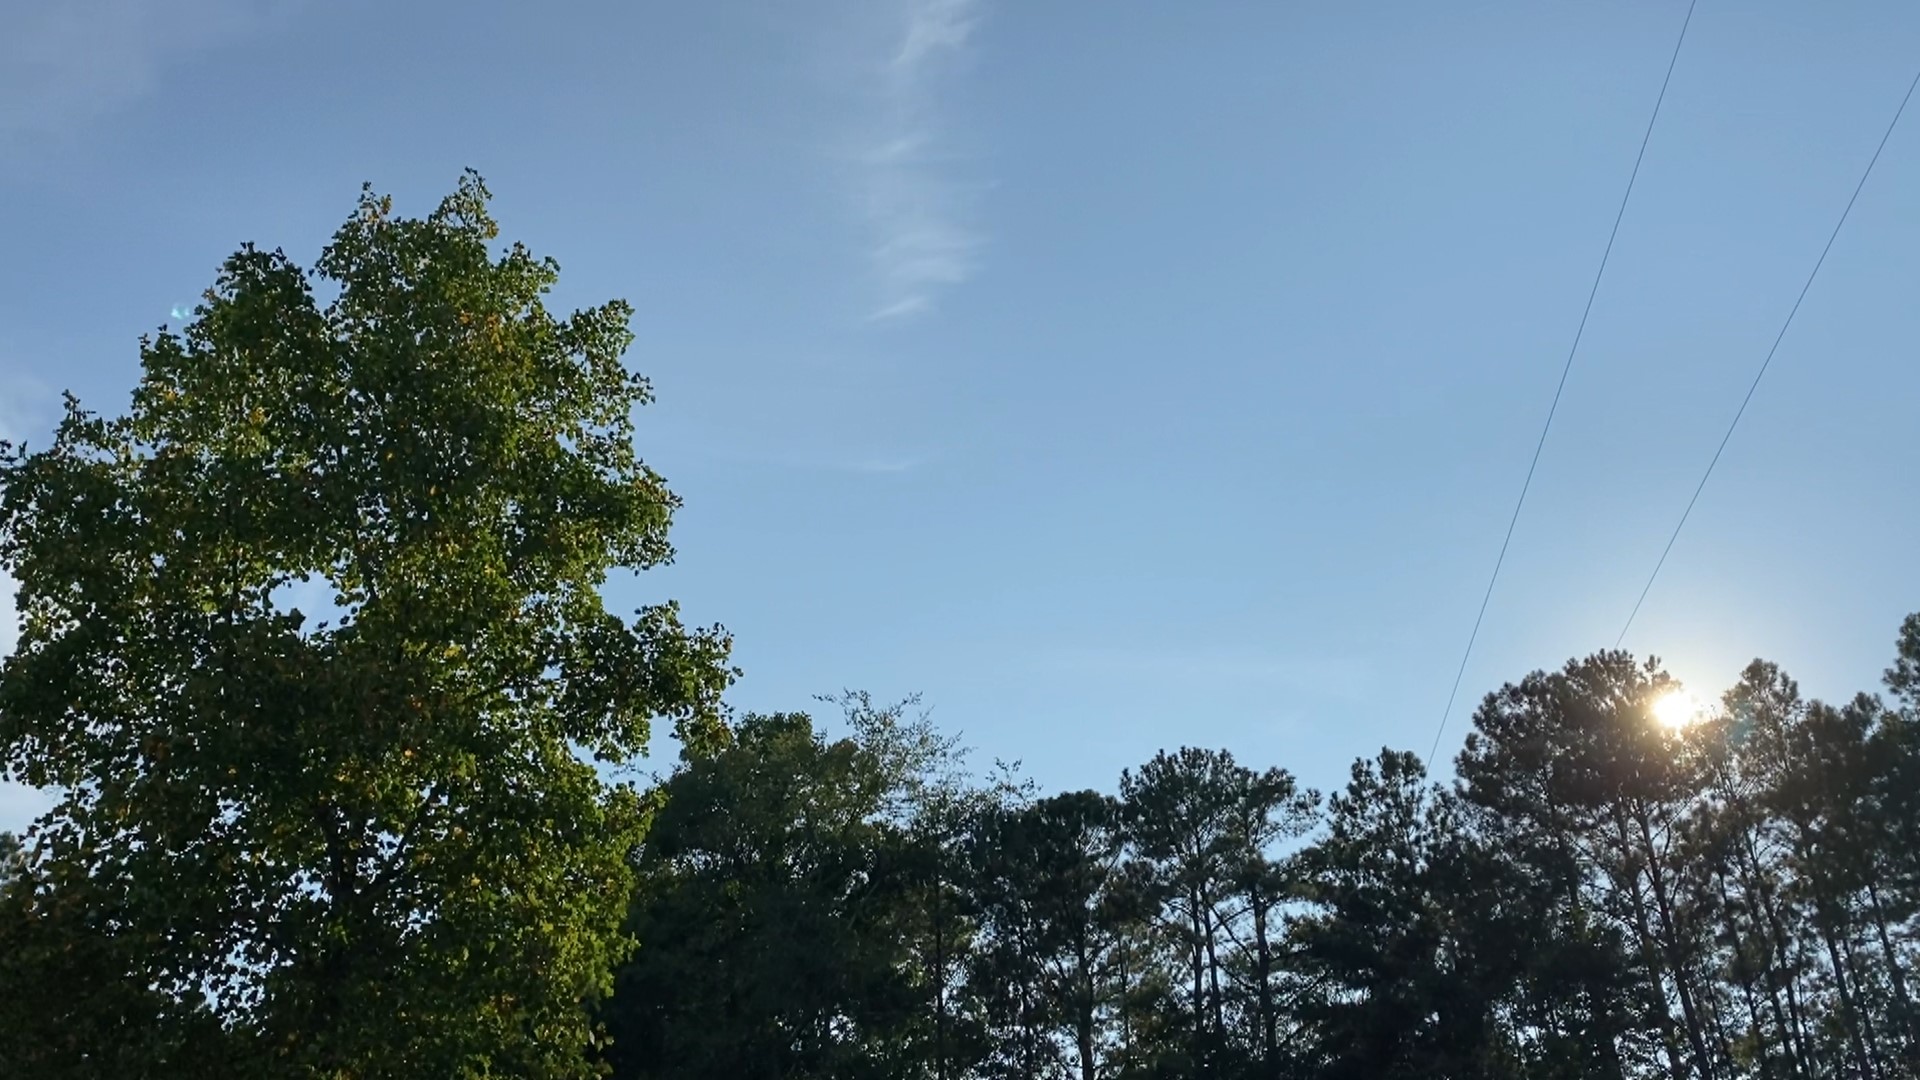 Central Georgia had some of the worst air quality in the nation last week. Here's why